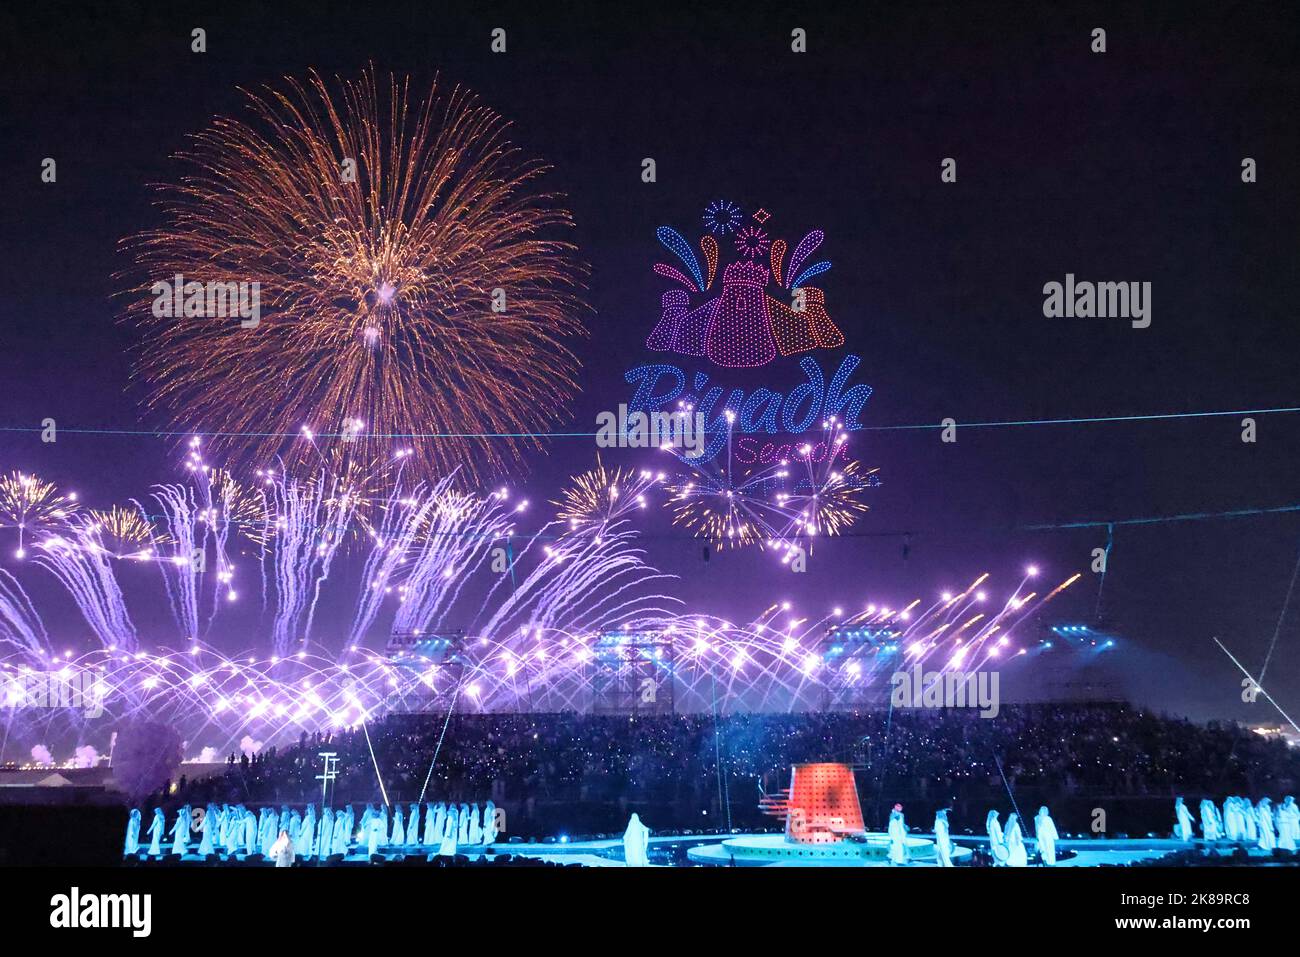 Riyadh, Saudi Arabia. 21st Oct, 2022. Fireworks are seen during the opening ceremony of Riyadh Season 2022 in Riyadh, Saudi Arabia, Oct. 21, 2022. Saudi Arabia's Riyadh Season 2022 started in its capital on Friday with a grand opening ceremony. Under the slogan 'Beyond Imagination,' this year marks the third edition of the Riyadh Season, one of the initiatives taken by Saudi Arabia to boost economic and tourist activity. Credit: Wang Haizhou/Xinhua/Alamy Live News Stock Photo